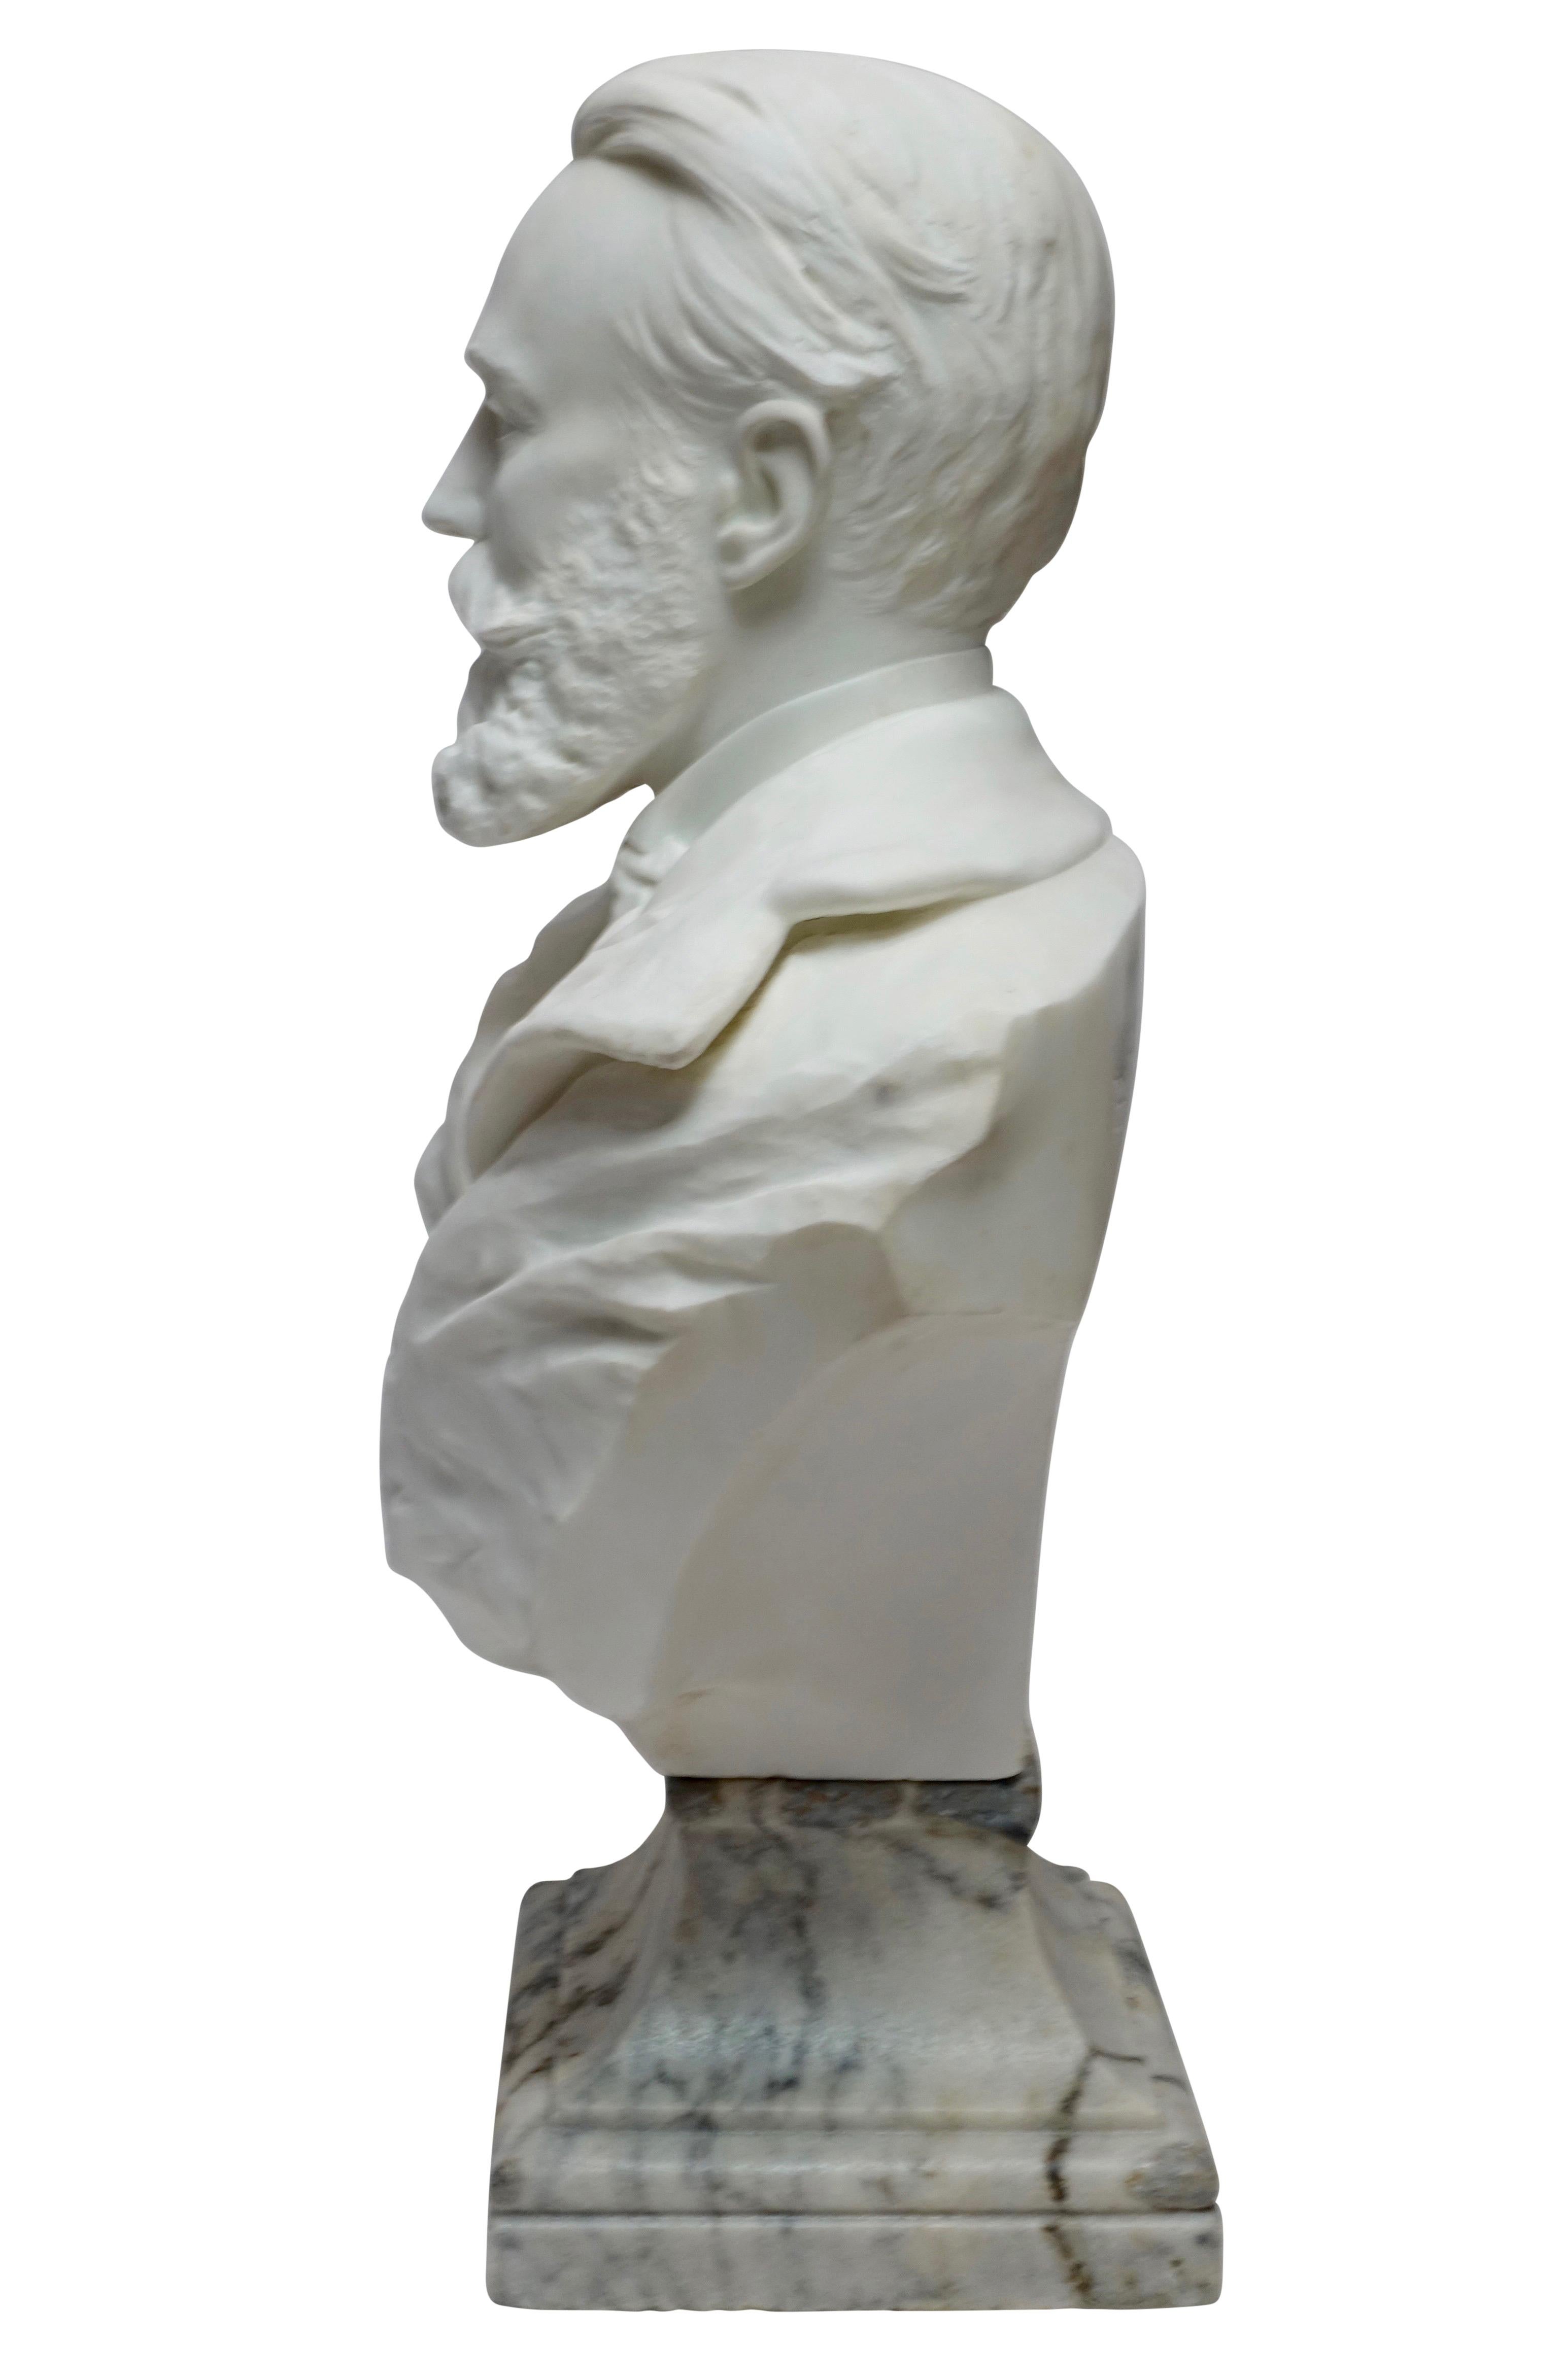 19th Century  19th cent. White Marble Bust of a Gentleman by R. Schmid Dated 1891